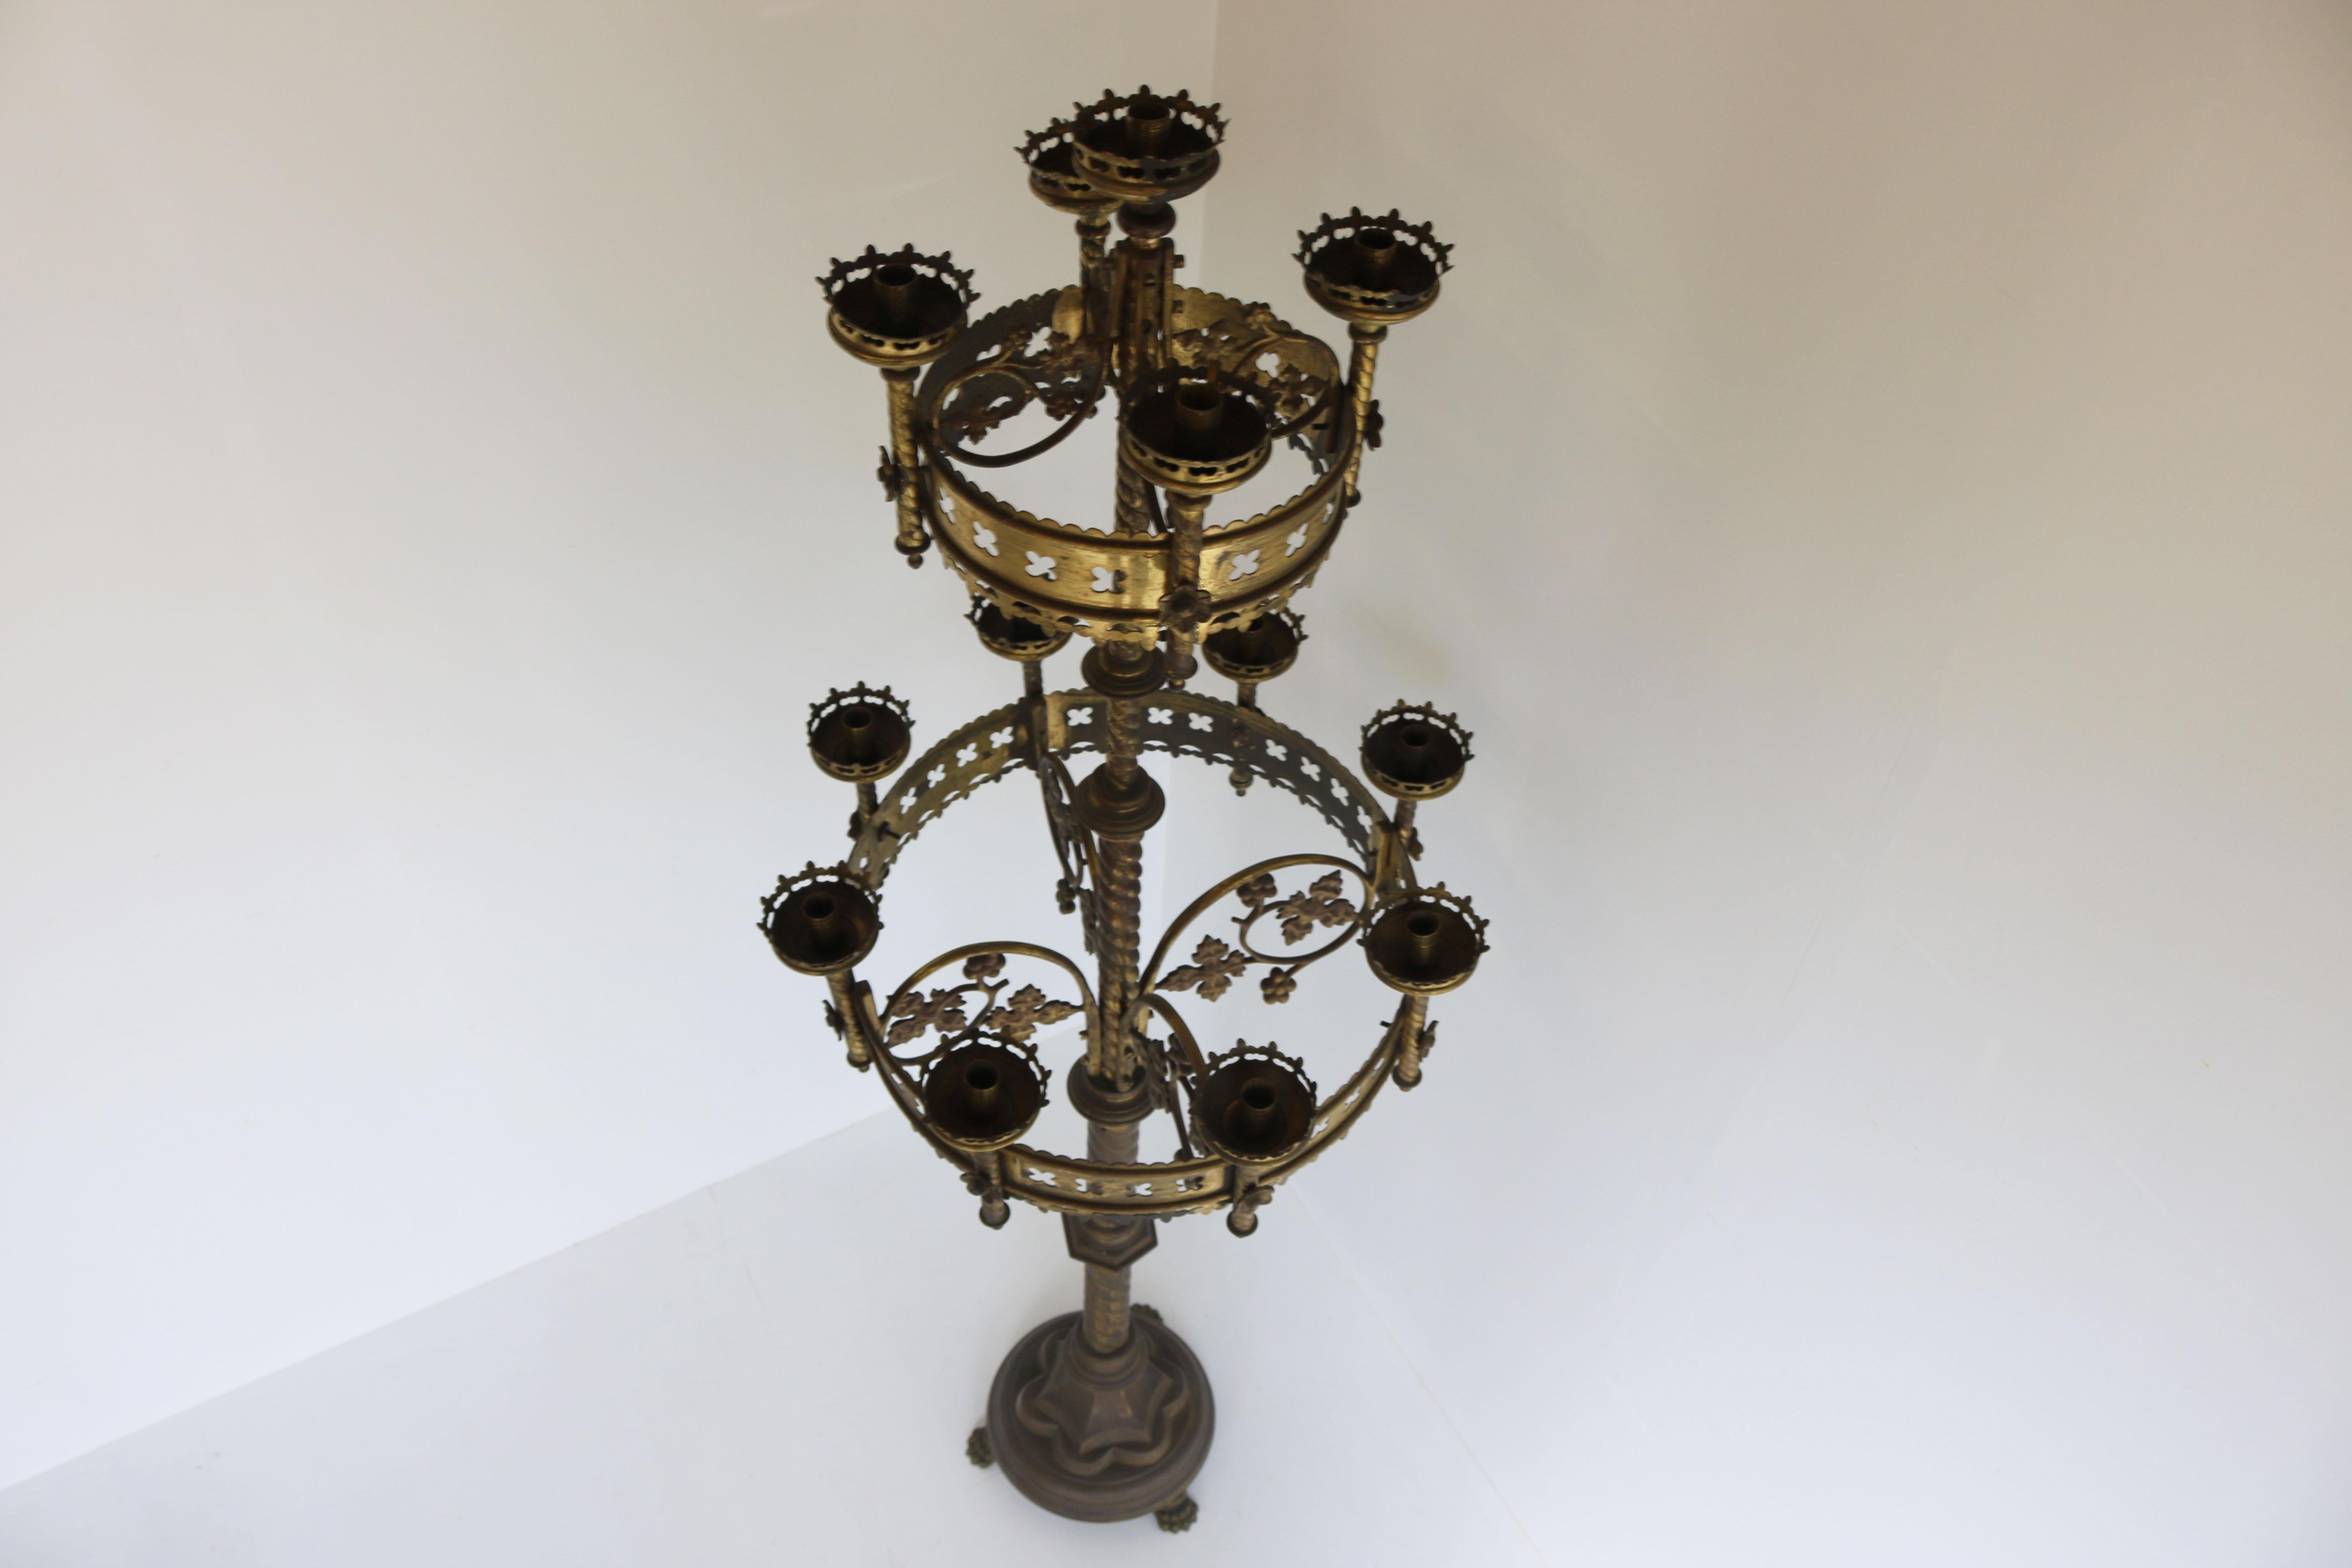 Large Antique Gothic Revival Church Candelabras 19th Century Brass Candlestick For Sale 1